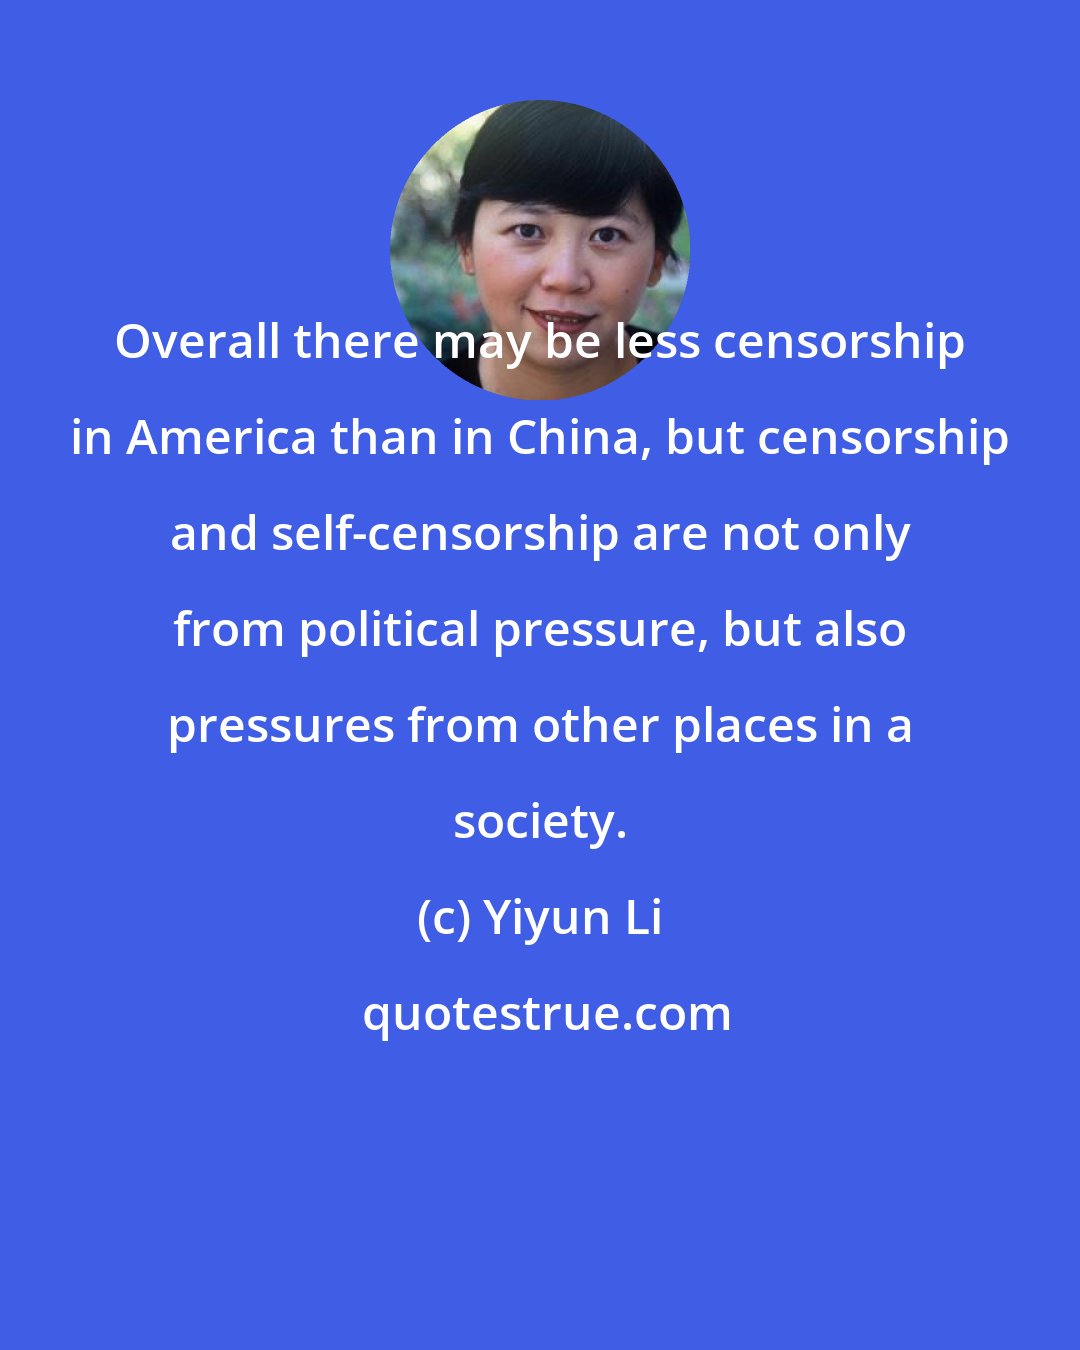 Yiyun Li: Overall there may be less censorship in America than in China, but censorship and self-censorship are not only from political pressure, but also pressures from other places in a society.